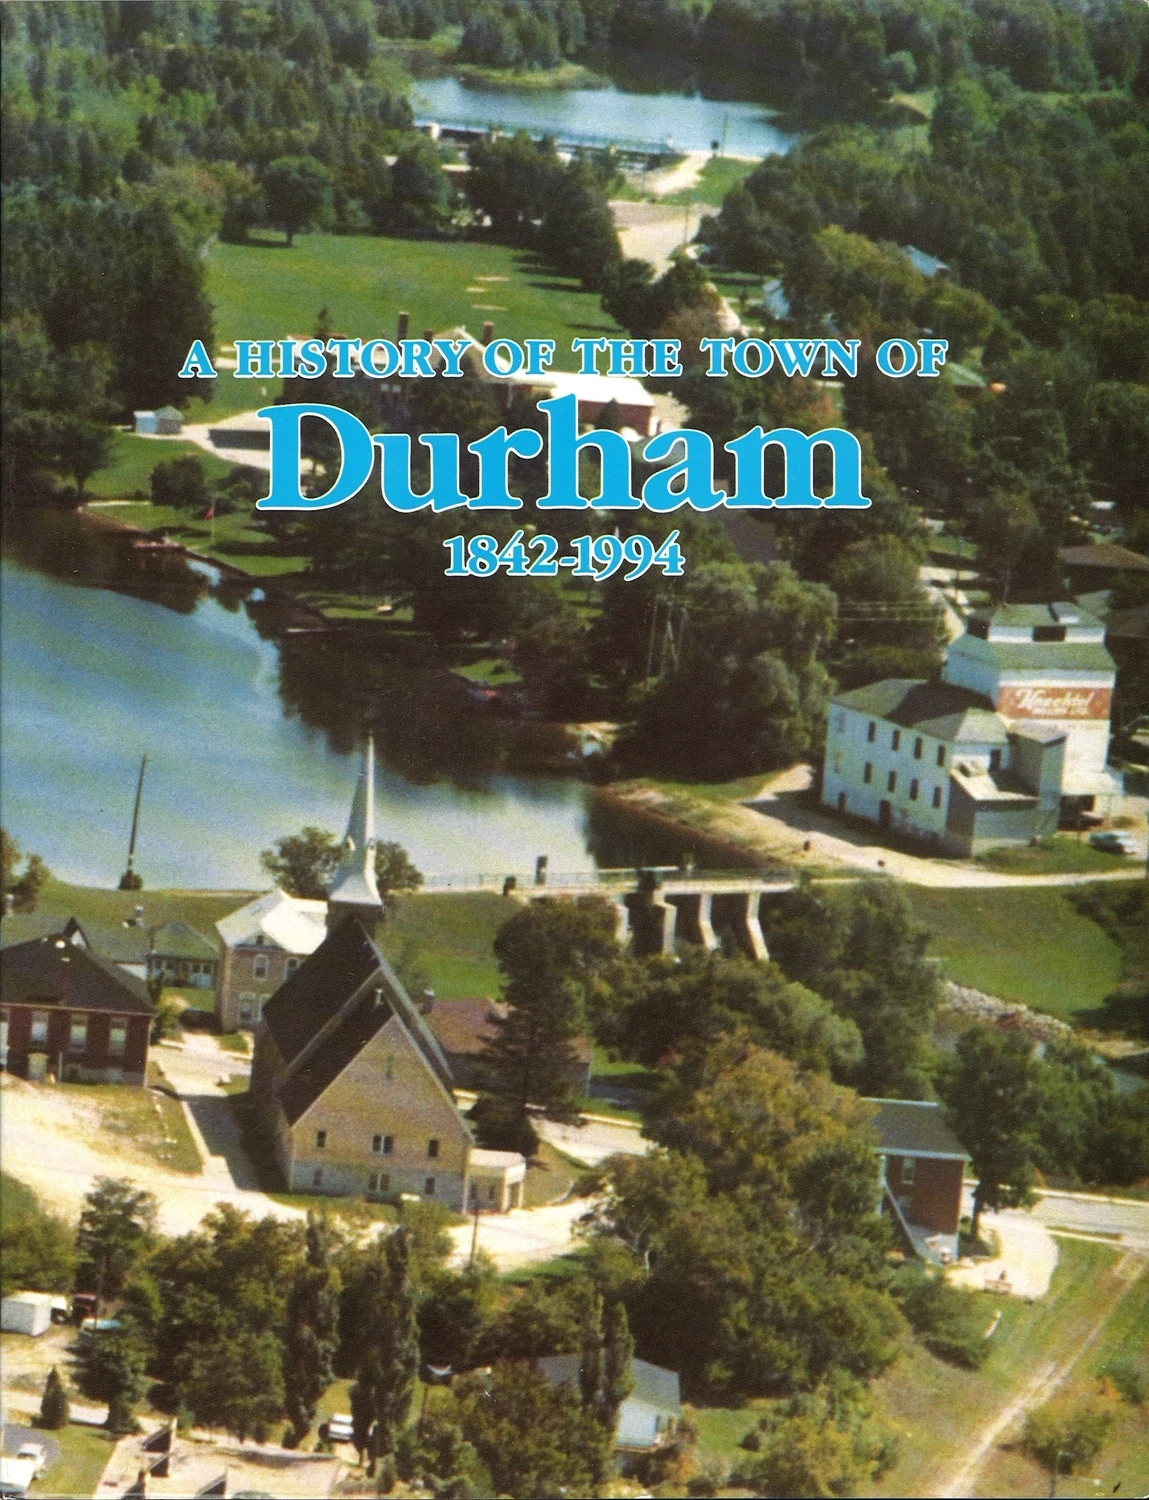 A History of The Town of Durham 1842-1994